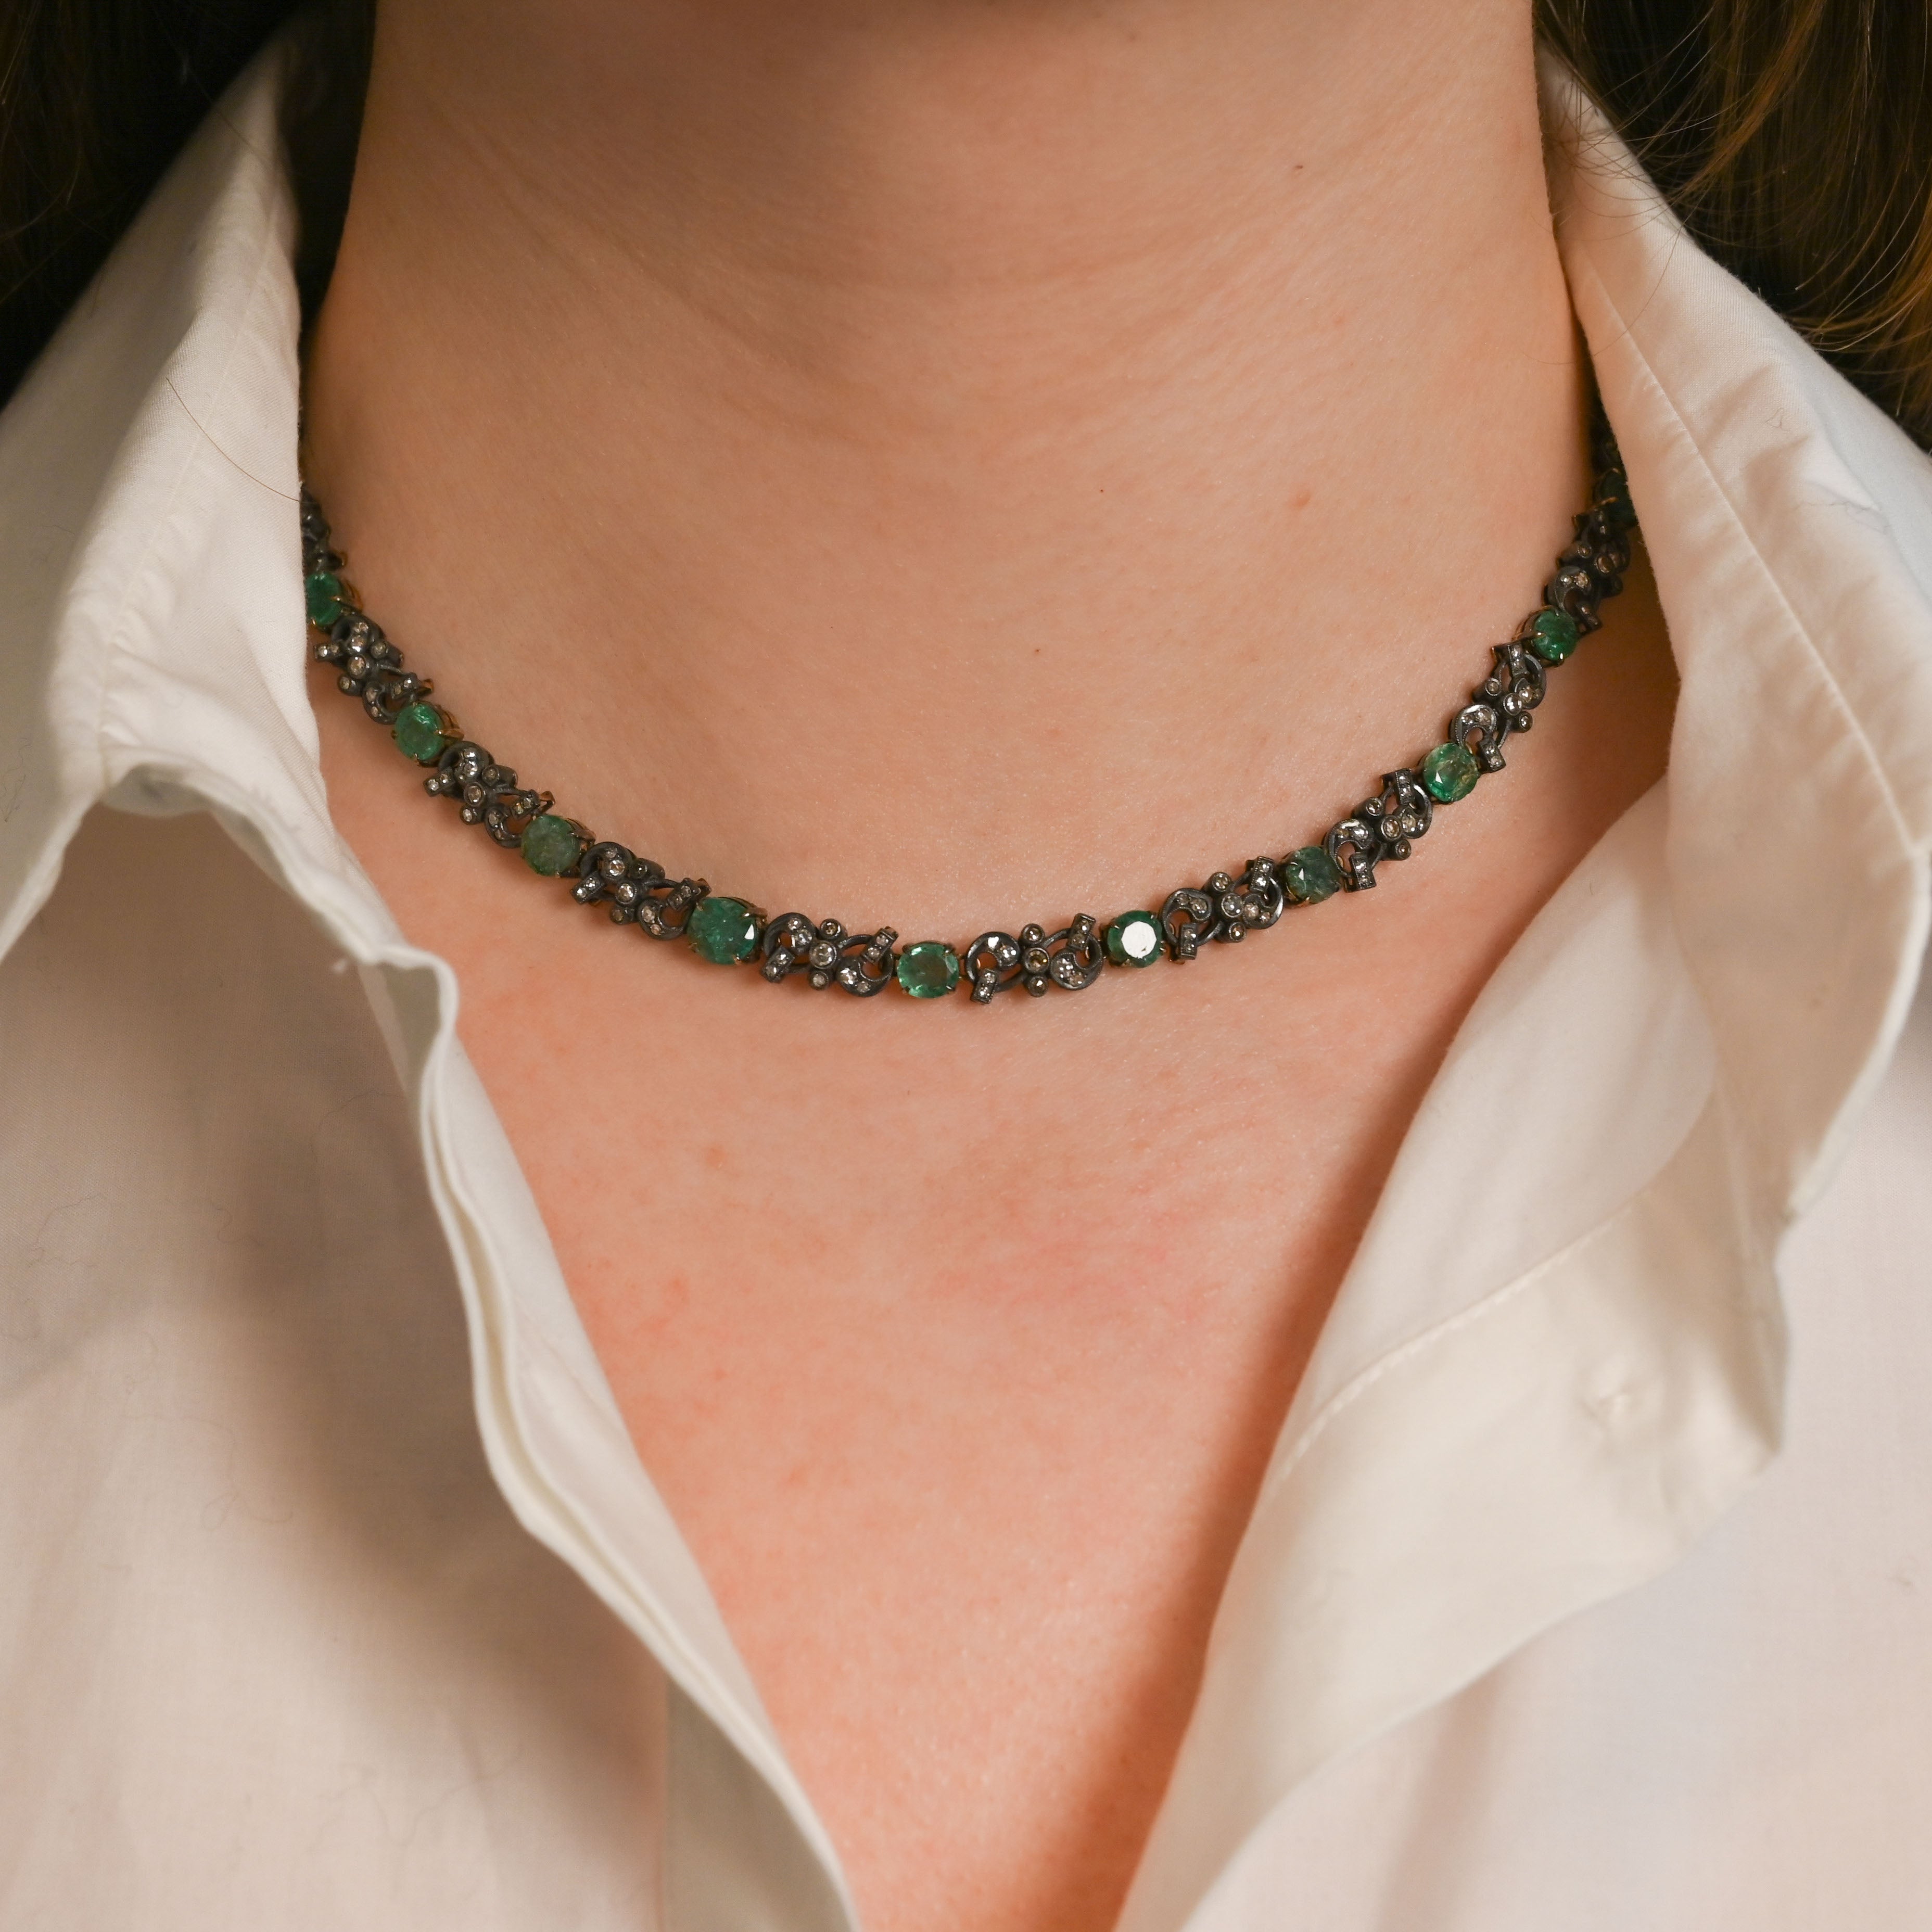 Victorian Diamond and Emerald Alternating Necklace